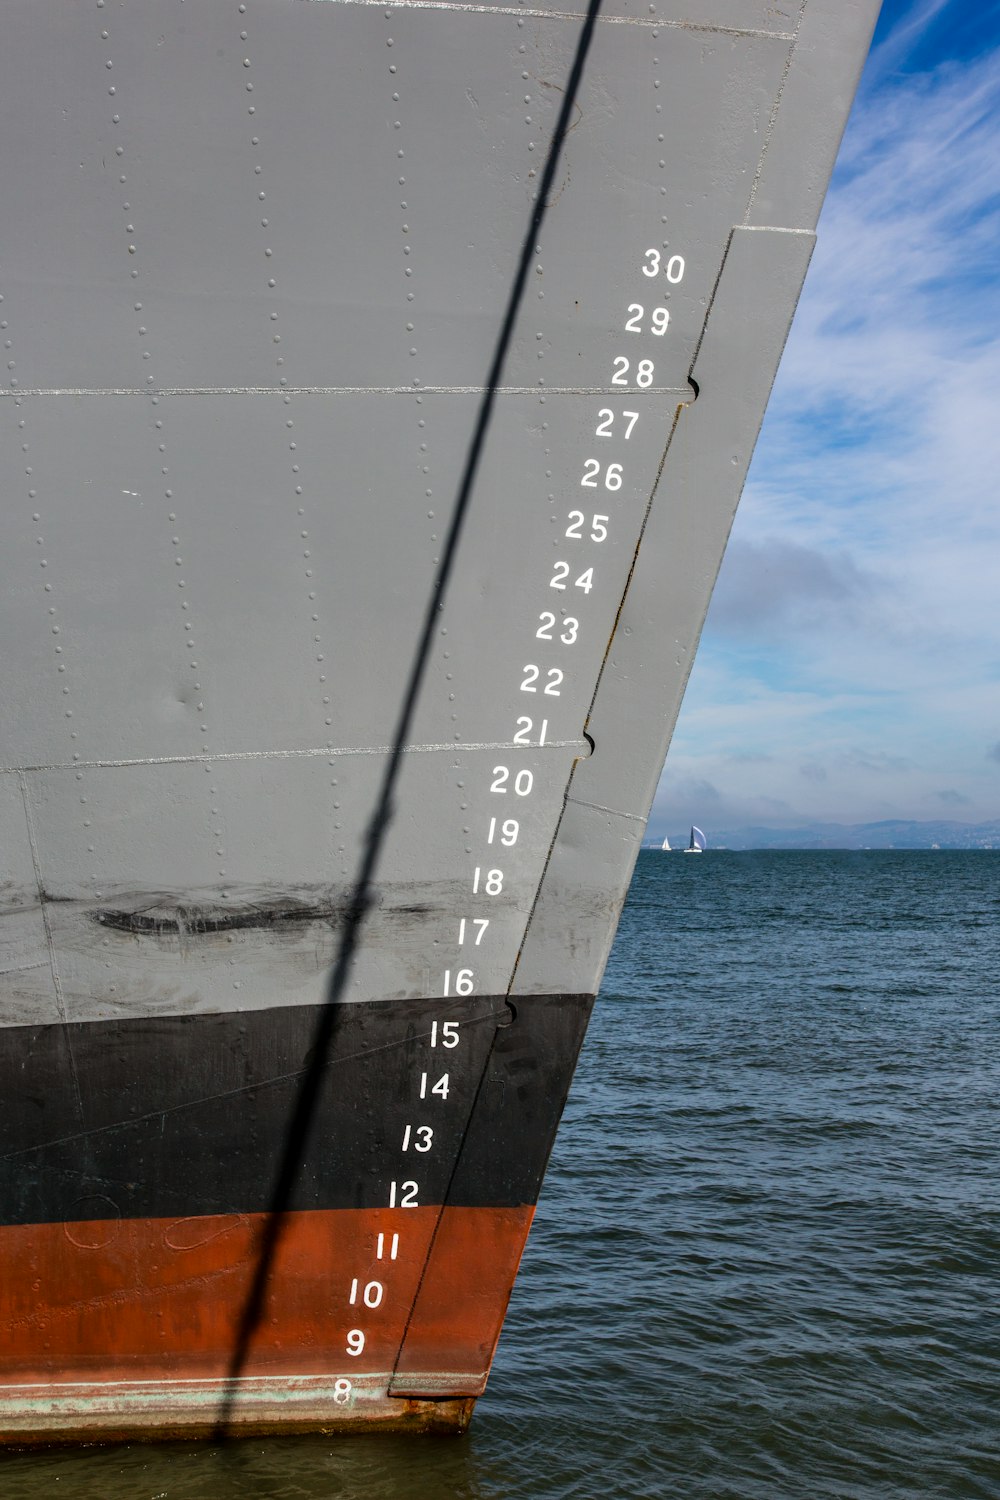 the side of a large ship in the water